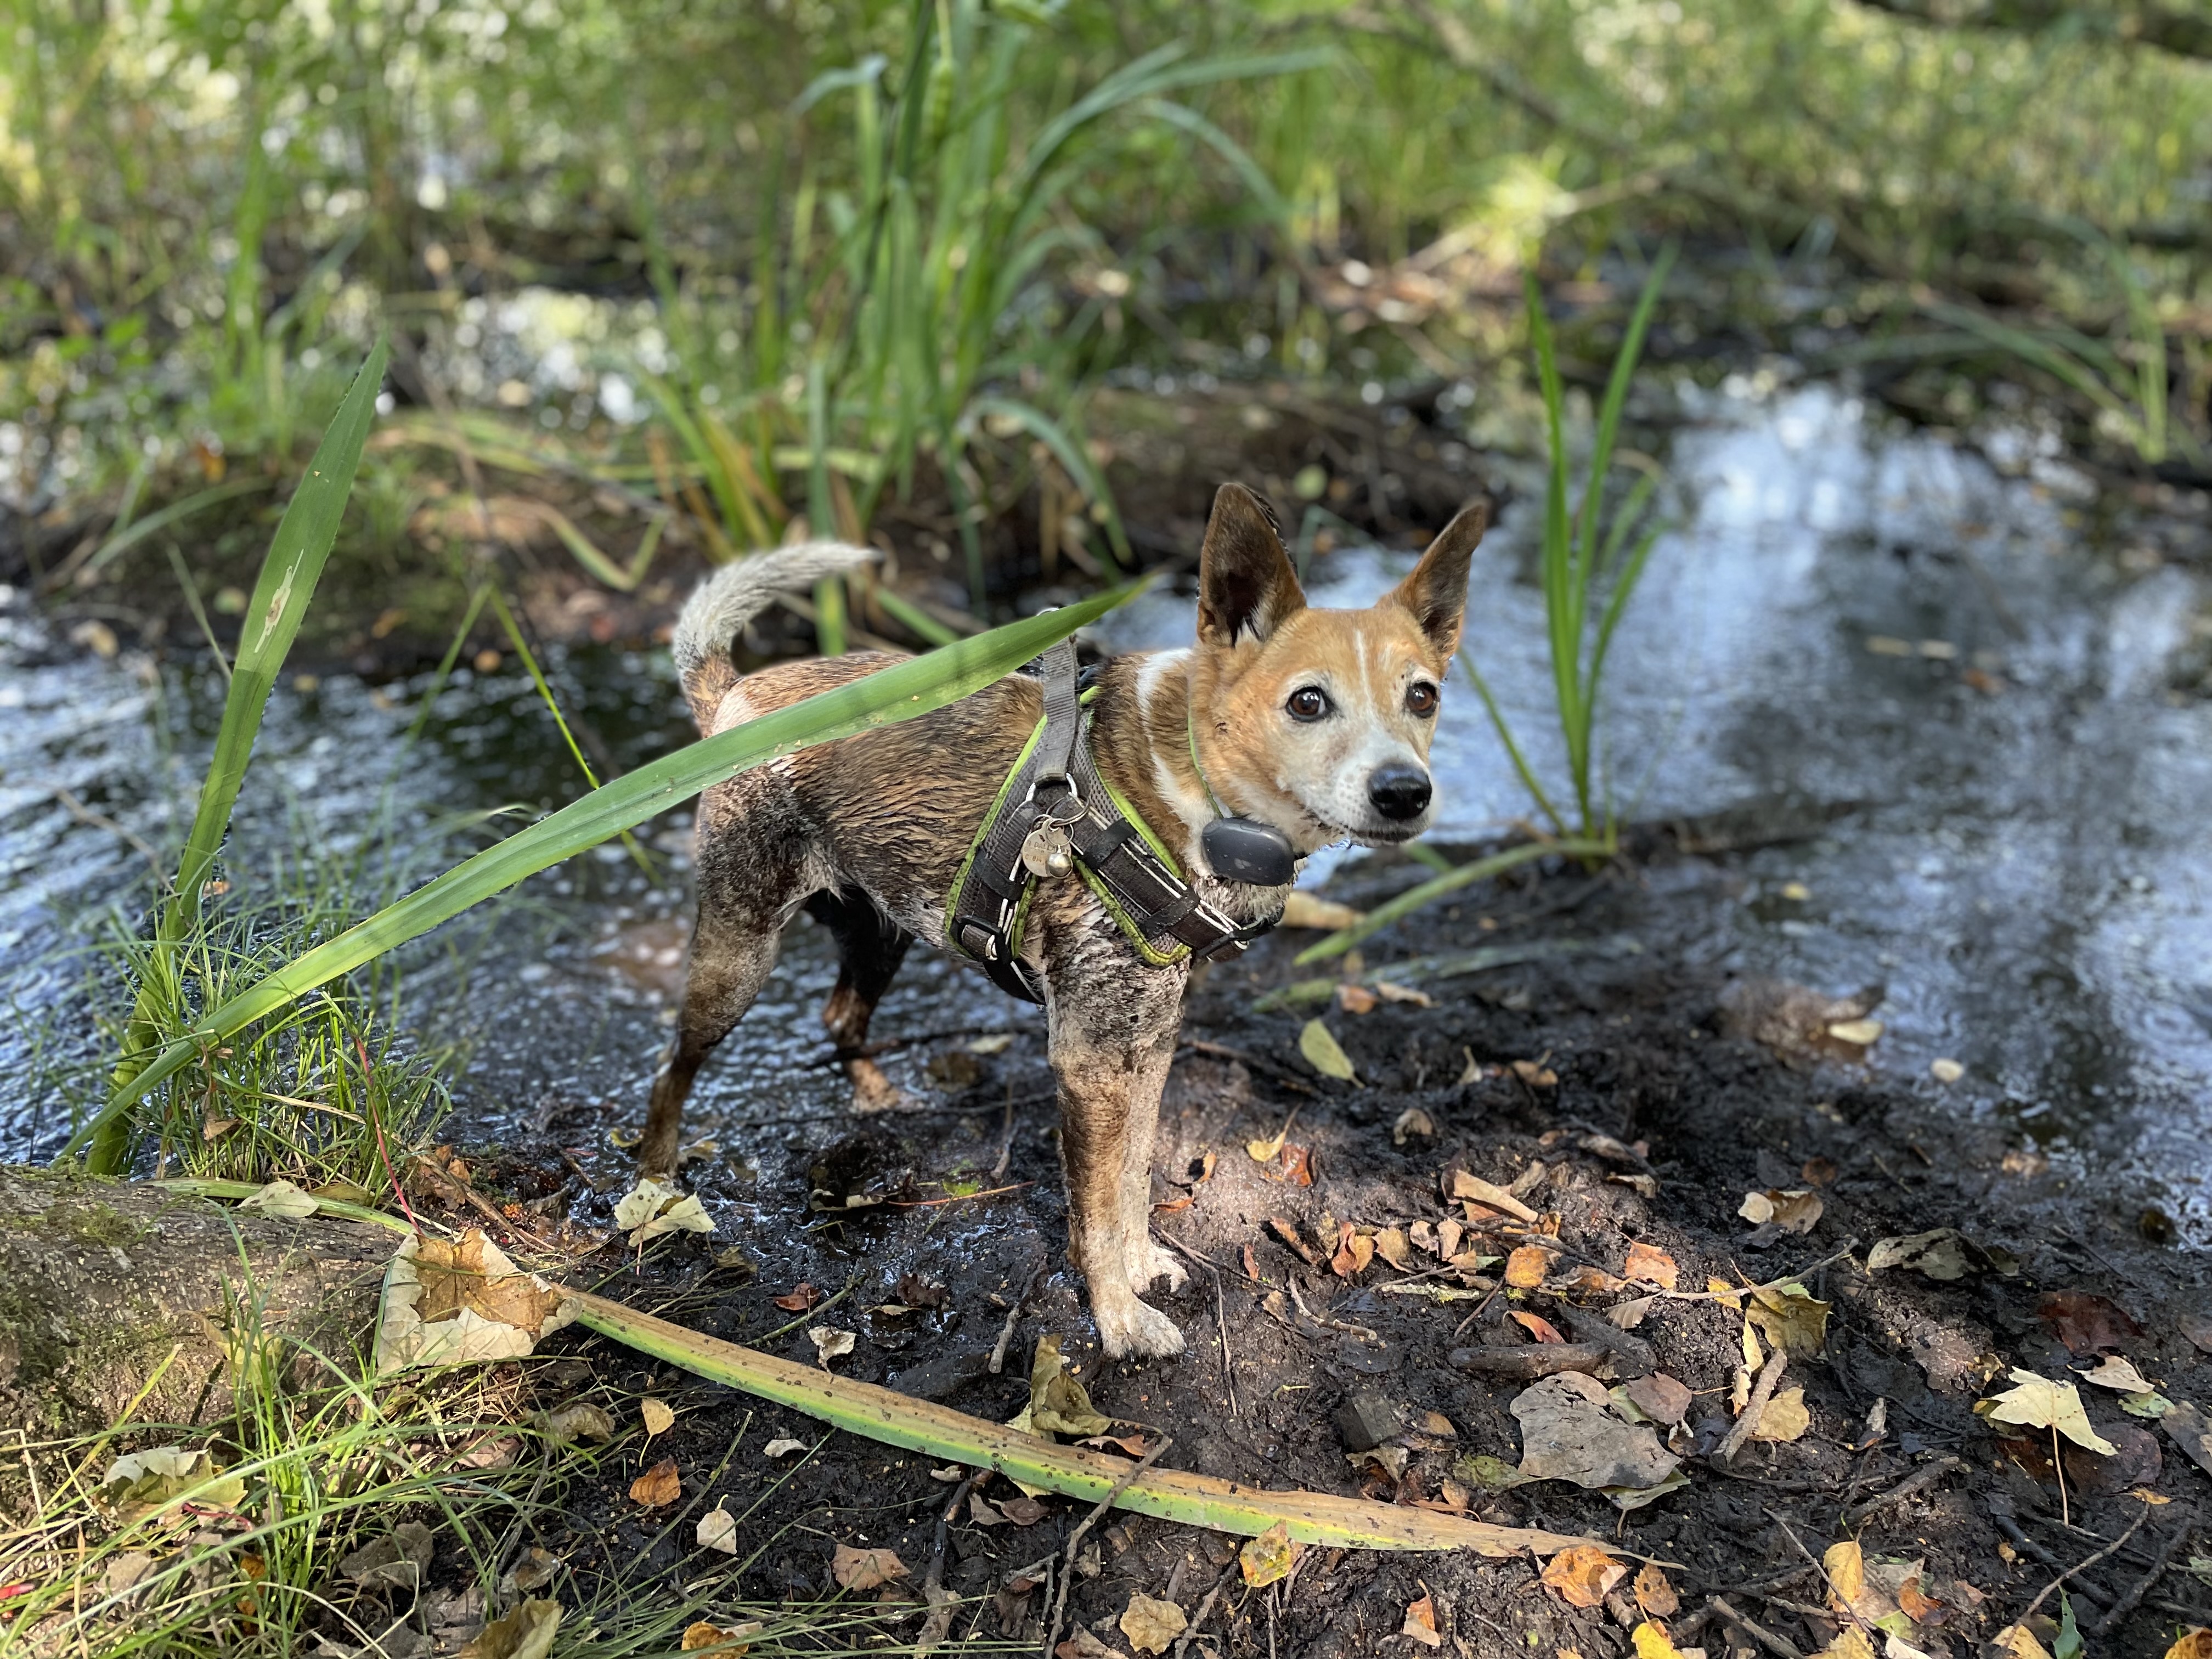 A filthy dog after duck chasing